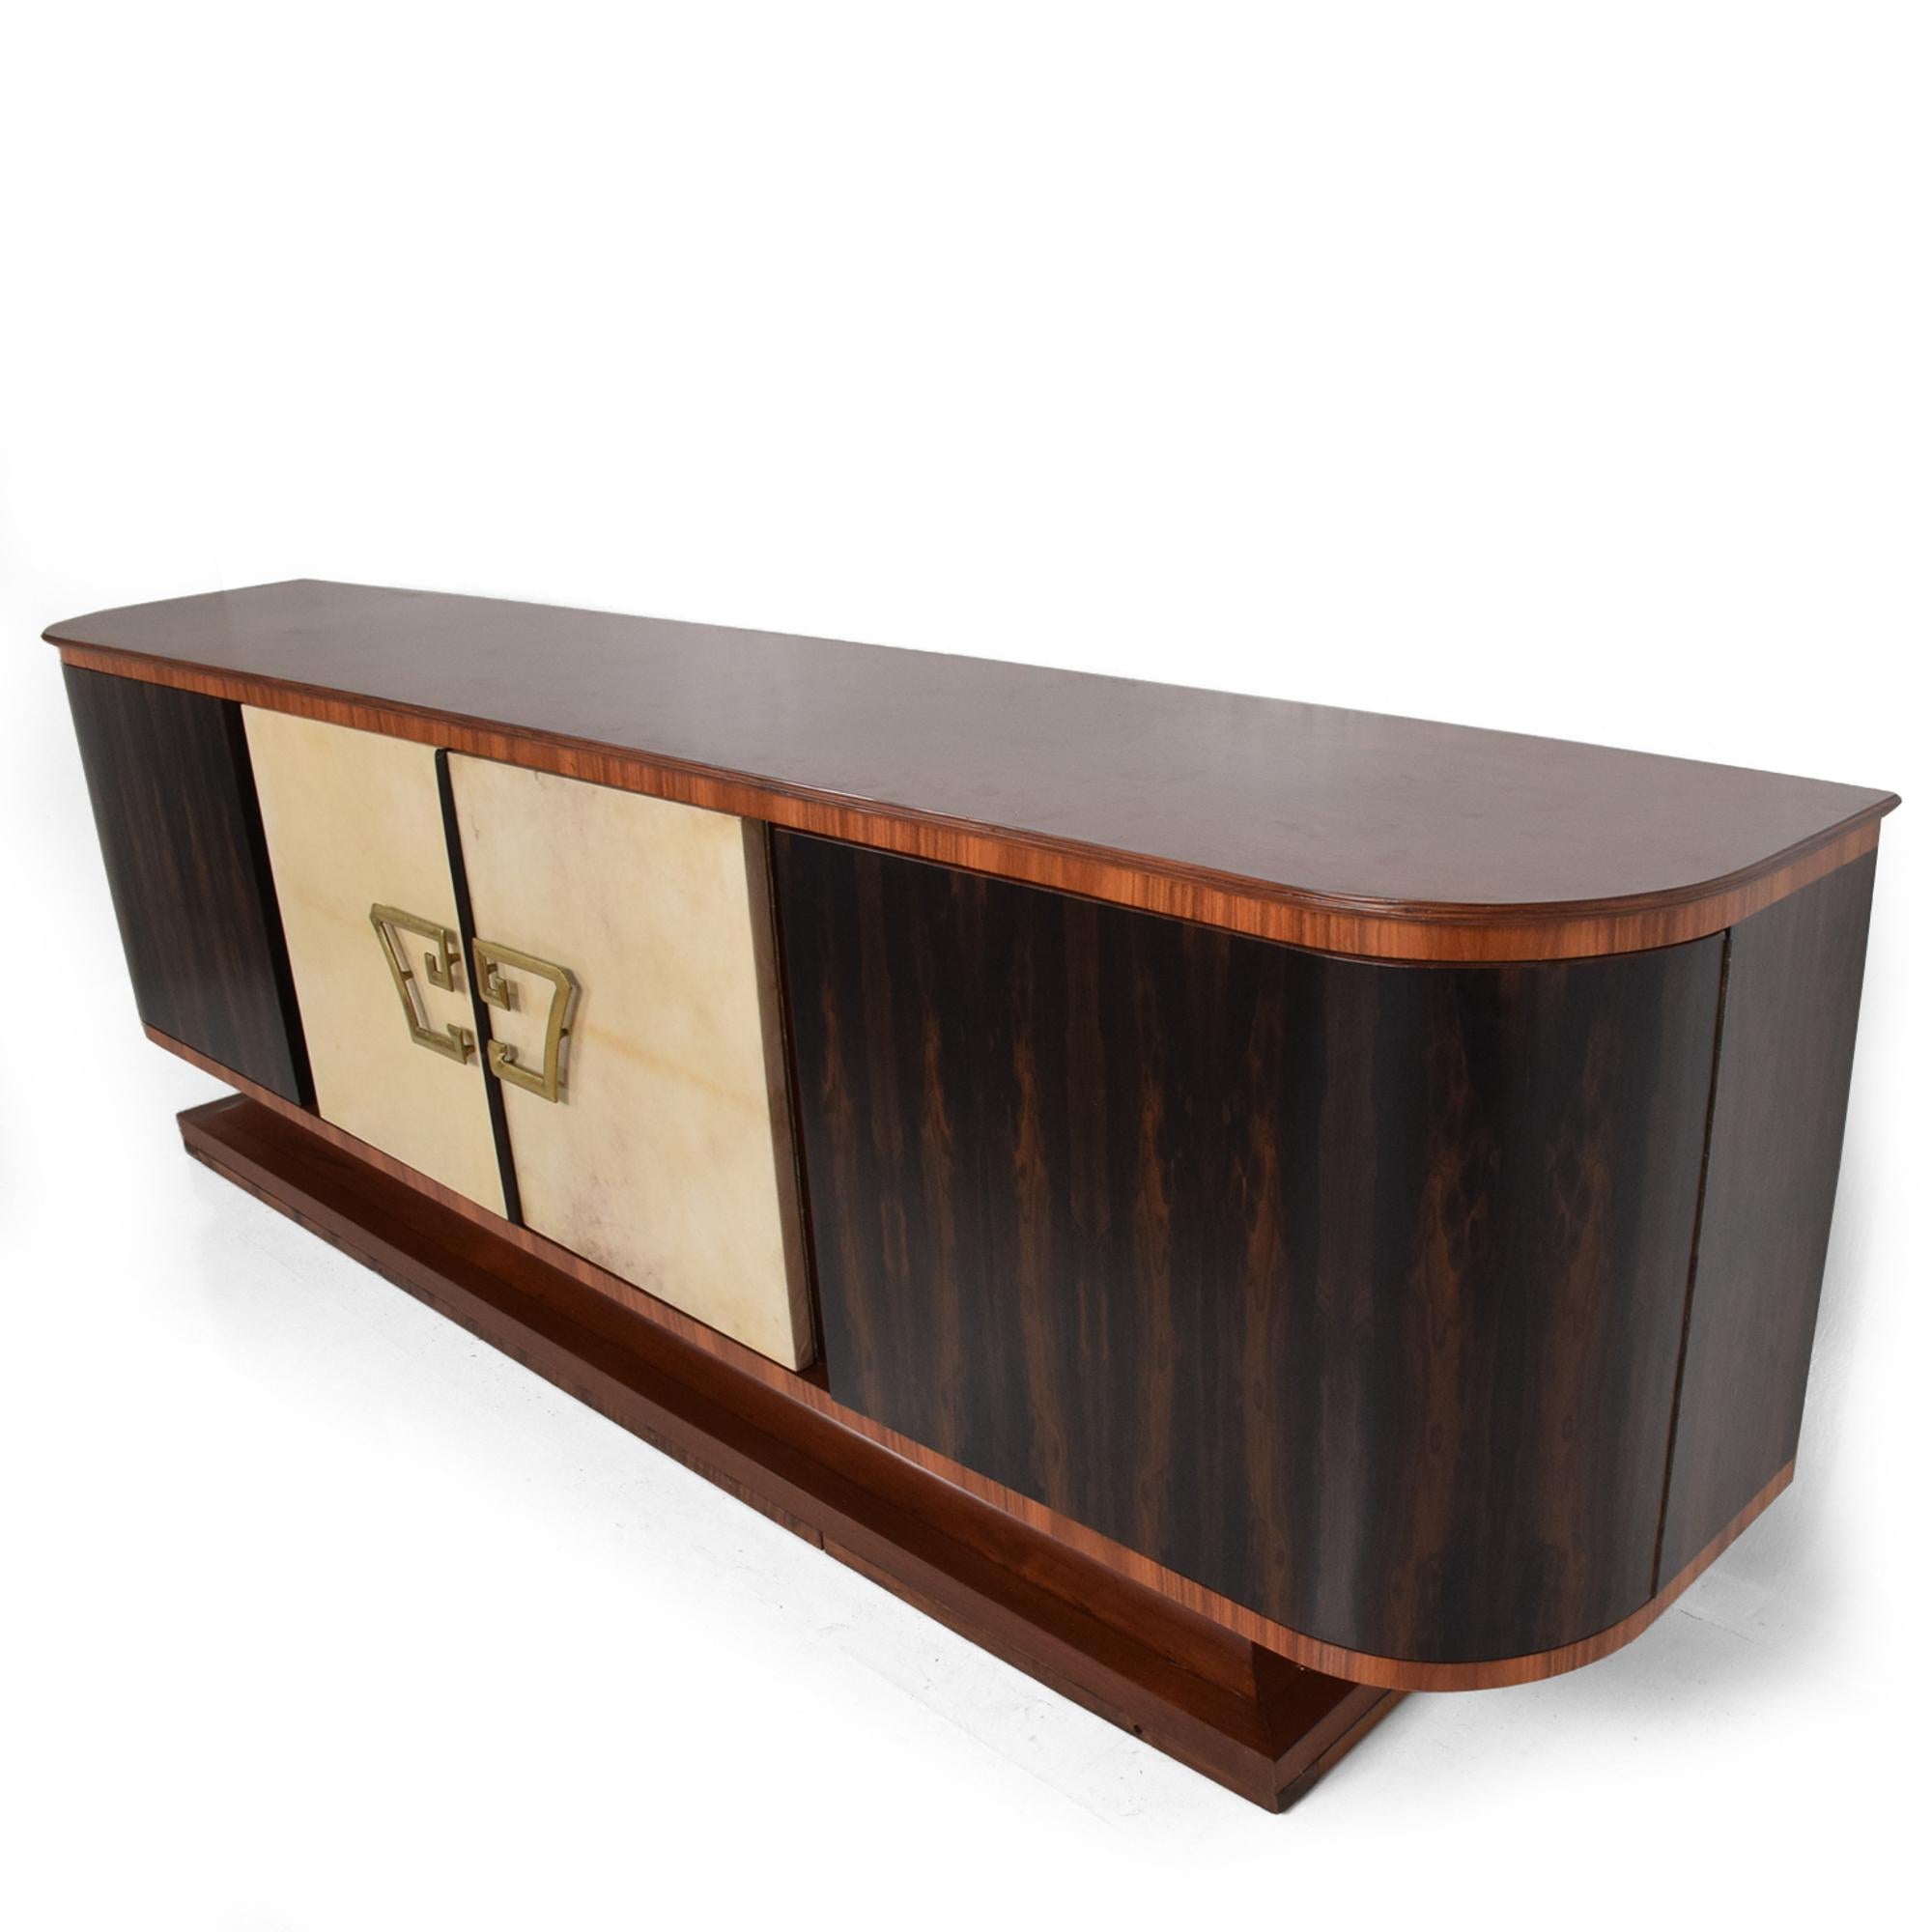 Mexican Modernism glamorous Hollywood Regency long curvy credenza in exotic wood, goatskin, mahogany and rosewood.
Center doors are covered in goatskin Leather with sensational solid brass pull handles.
Center section features eight pull out